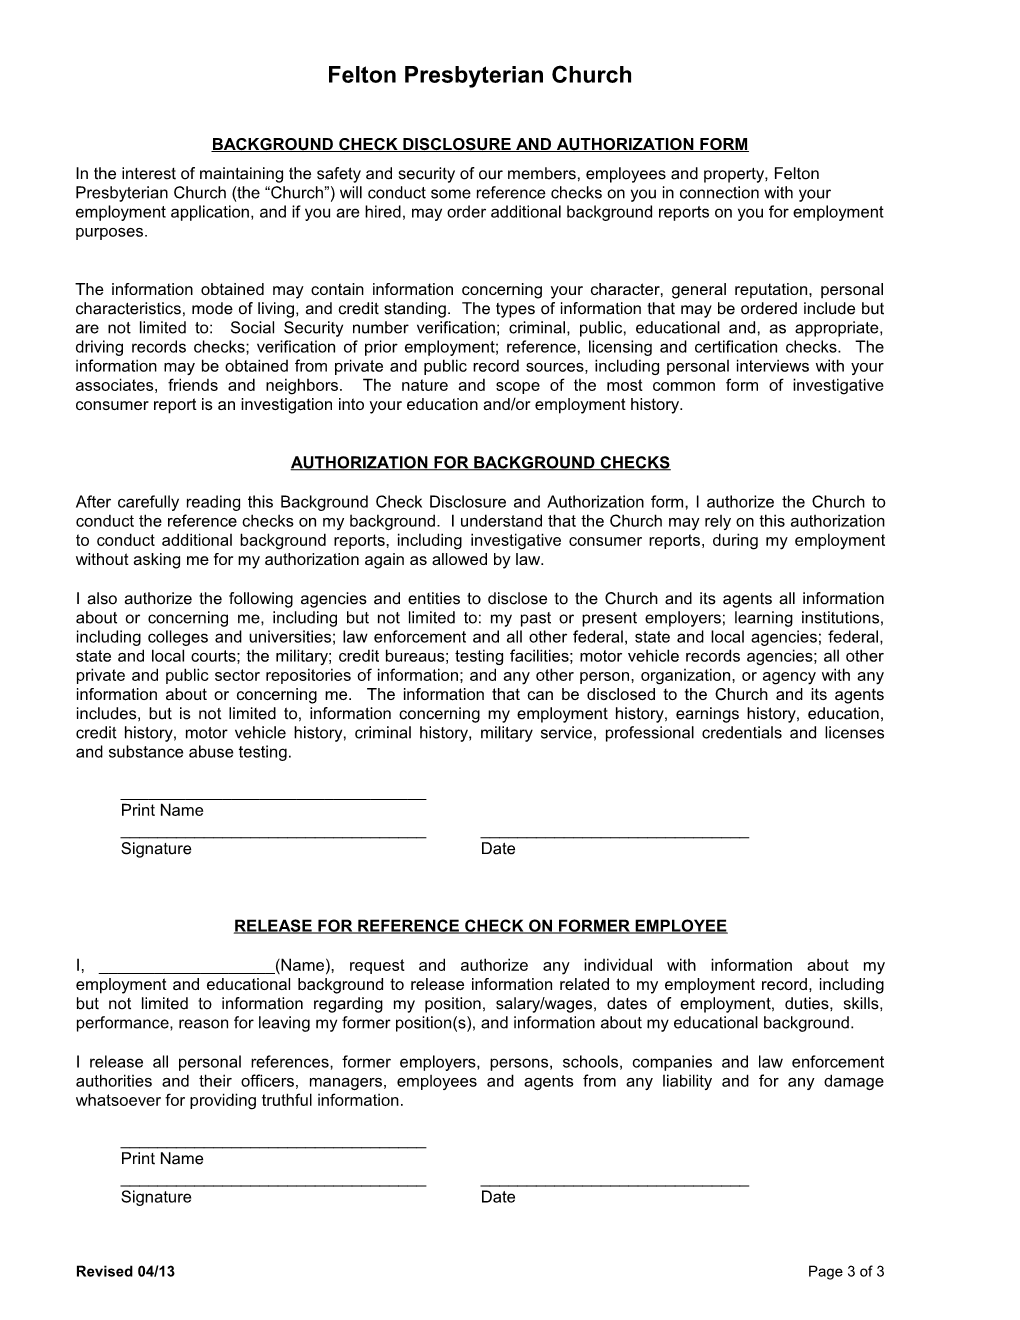 Background Check Disclosure and Authorization Form